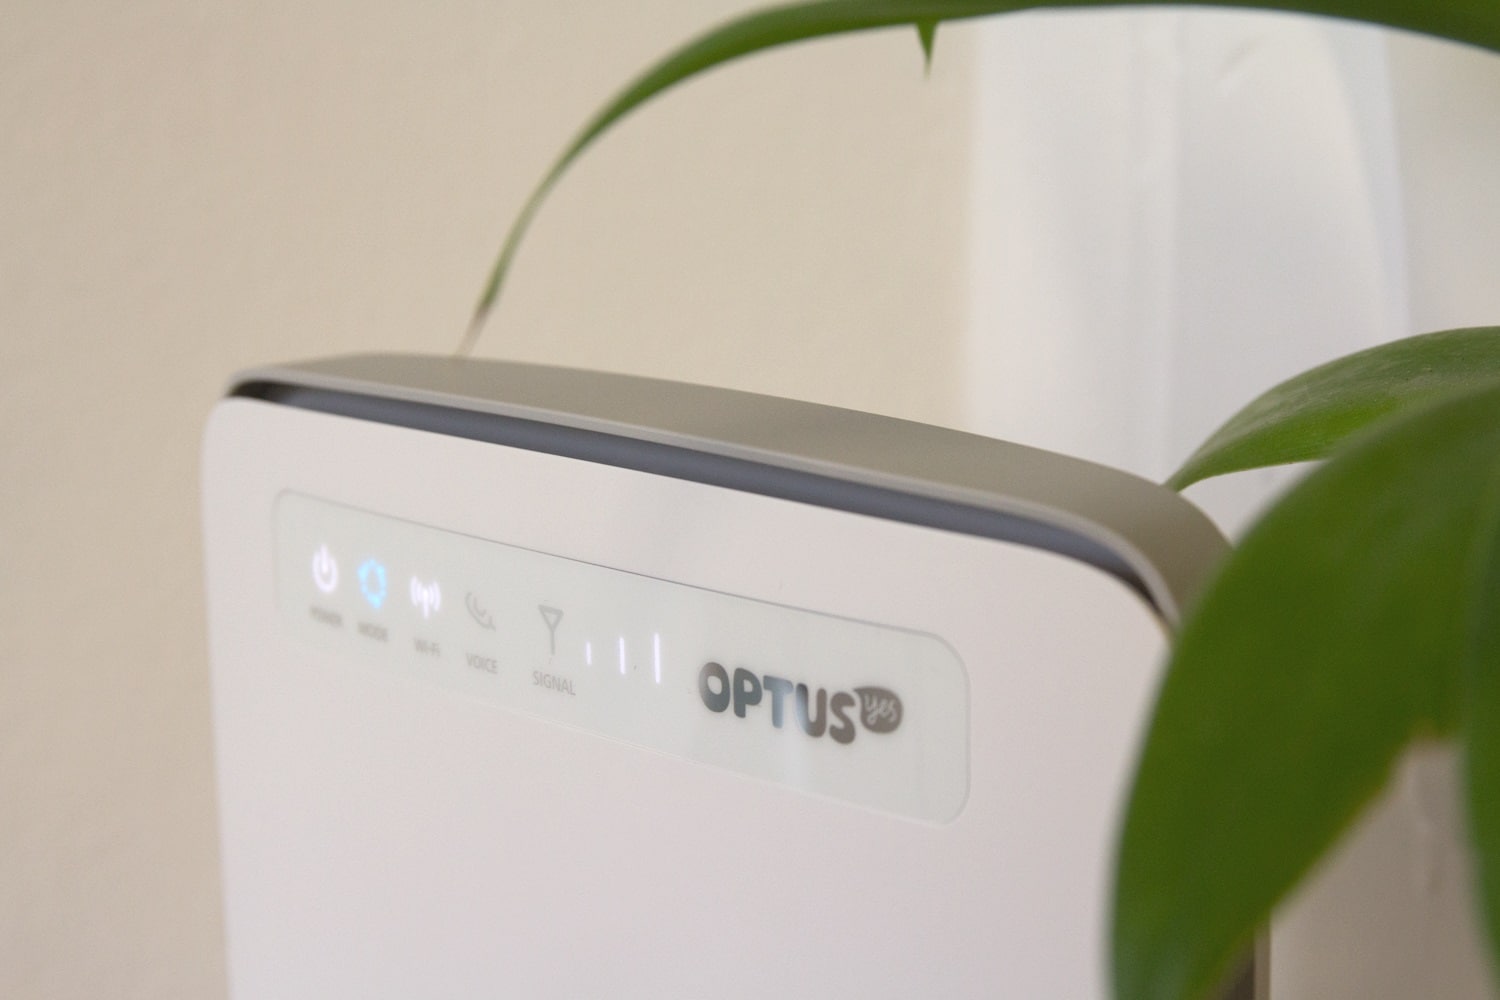 moving house with optus home wireless broadband service